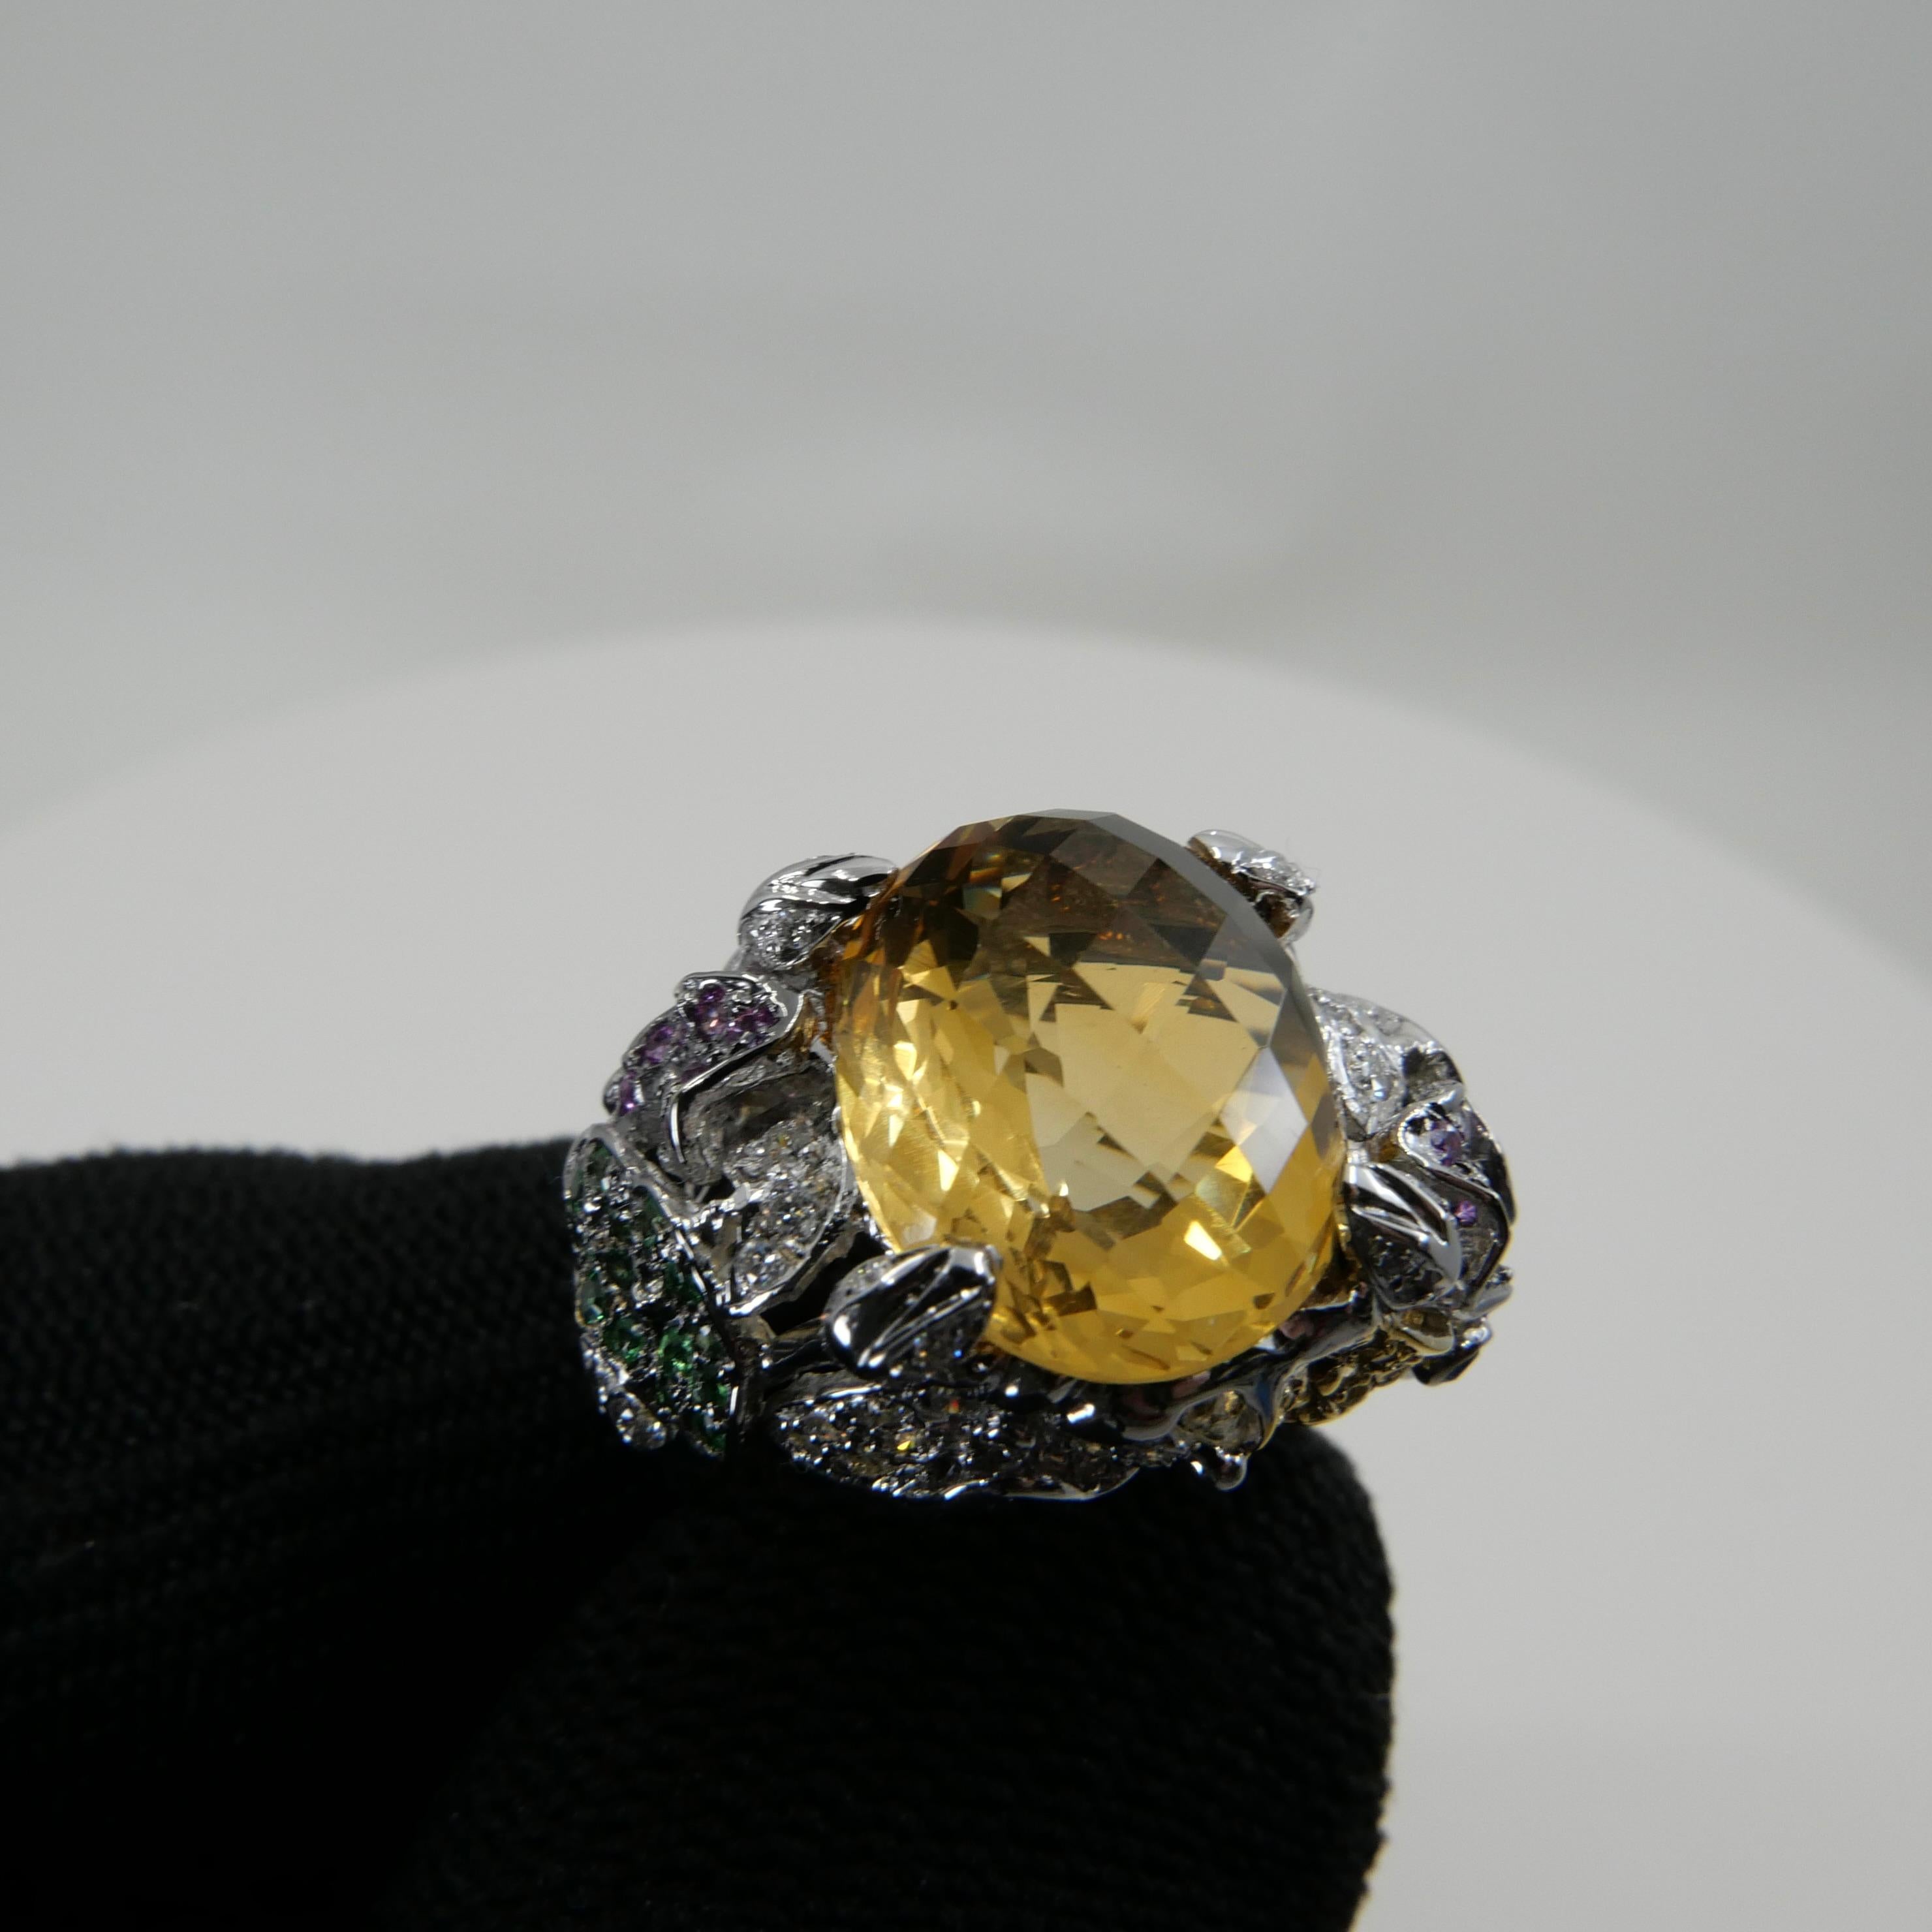 Checker Cut Yellow Topaz, Diamond & Colored Gemstones Cocktail Ring, Colorful For Sale 6